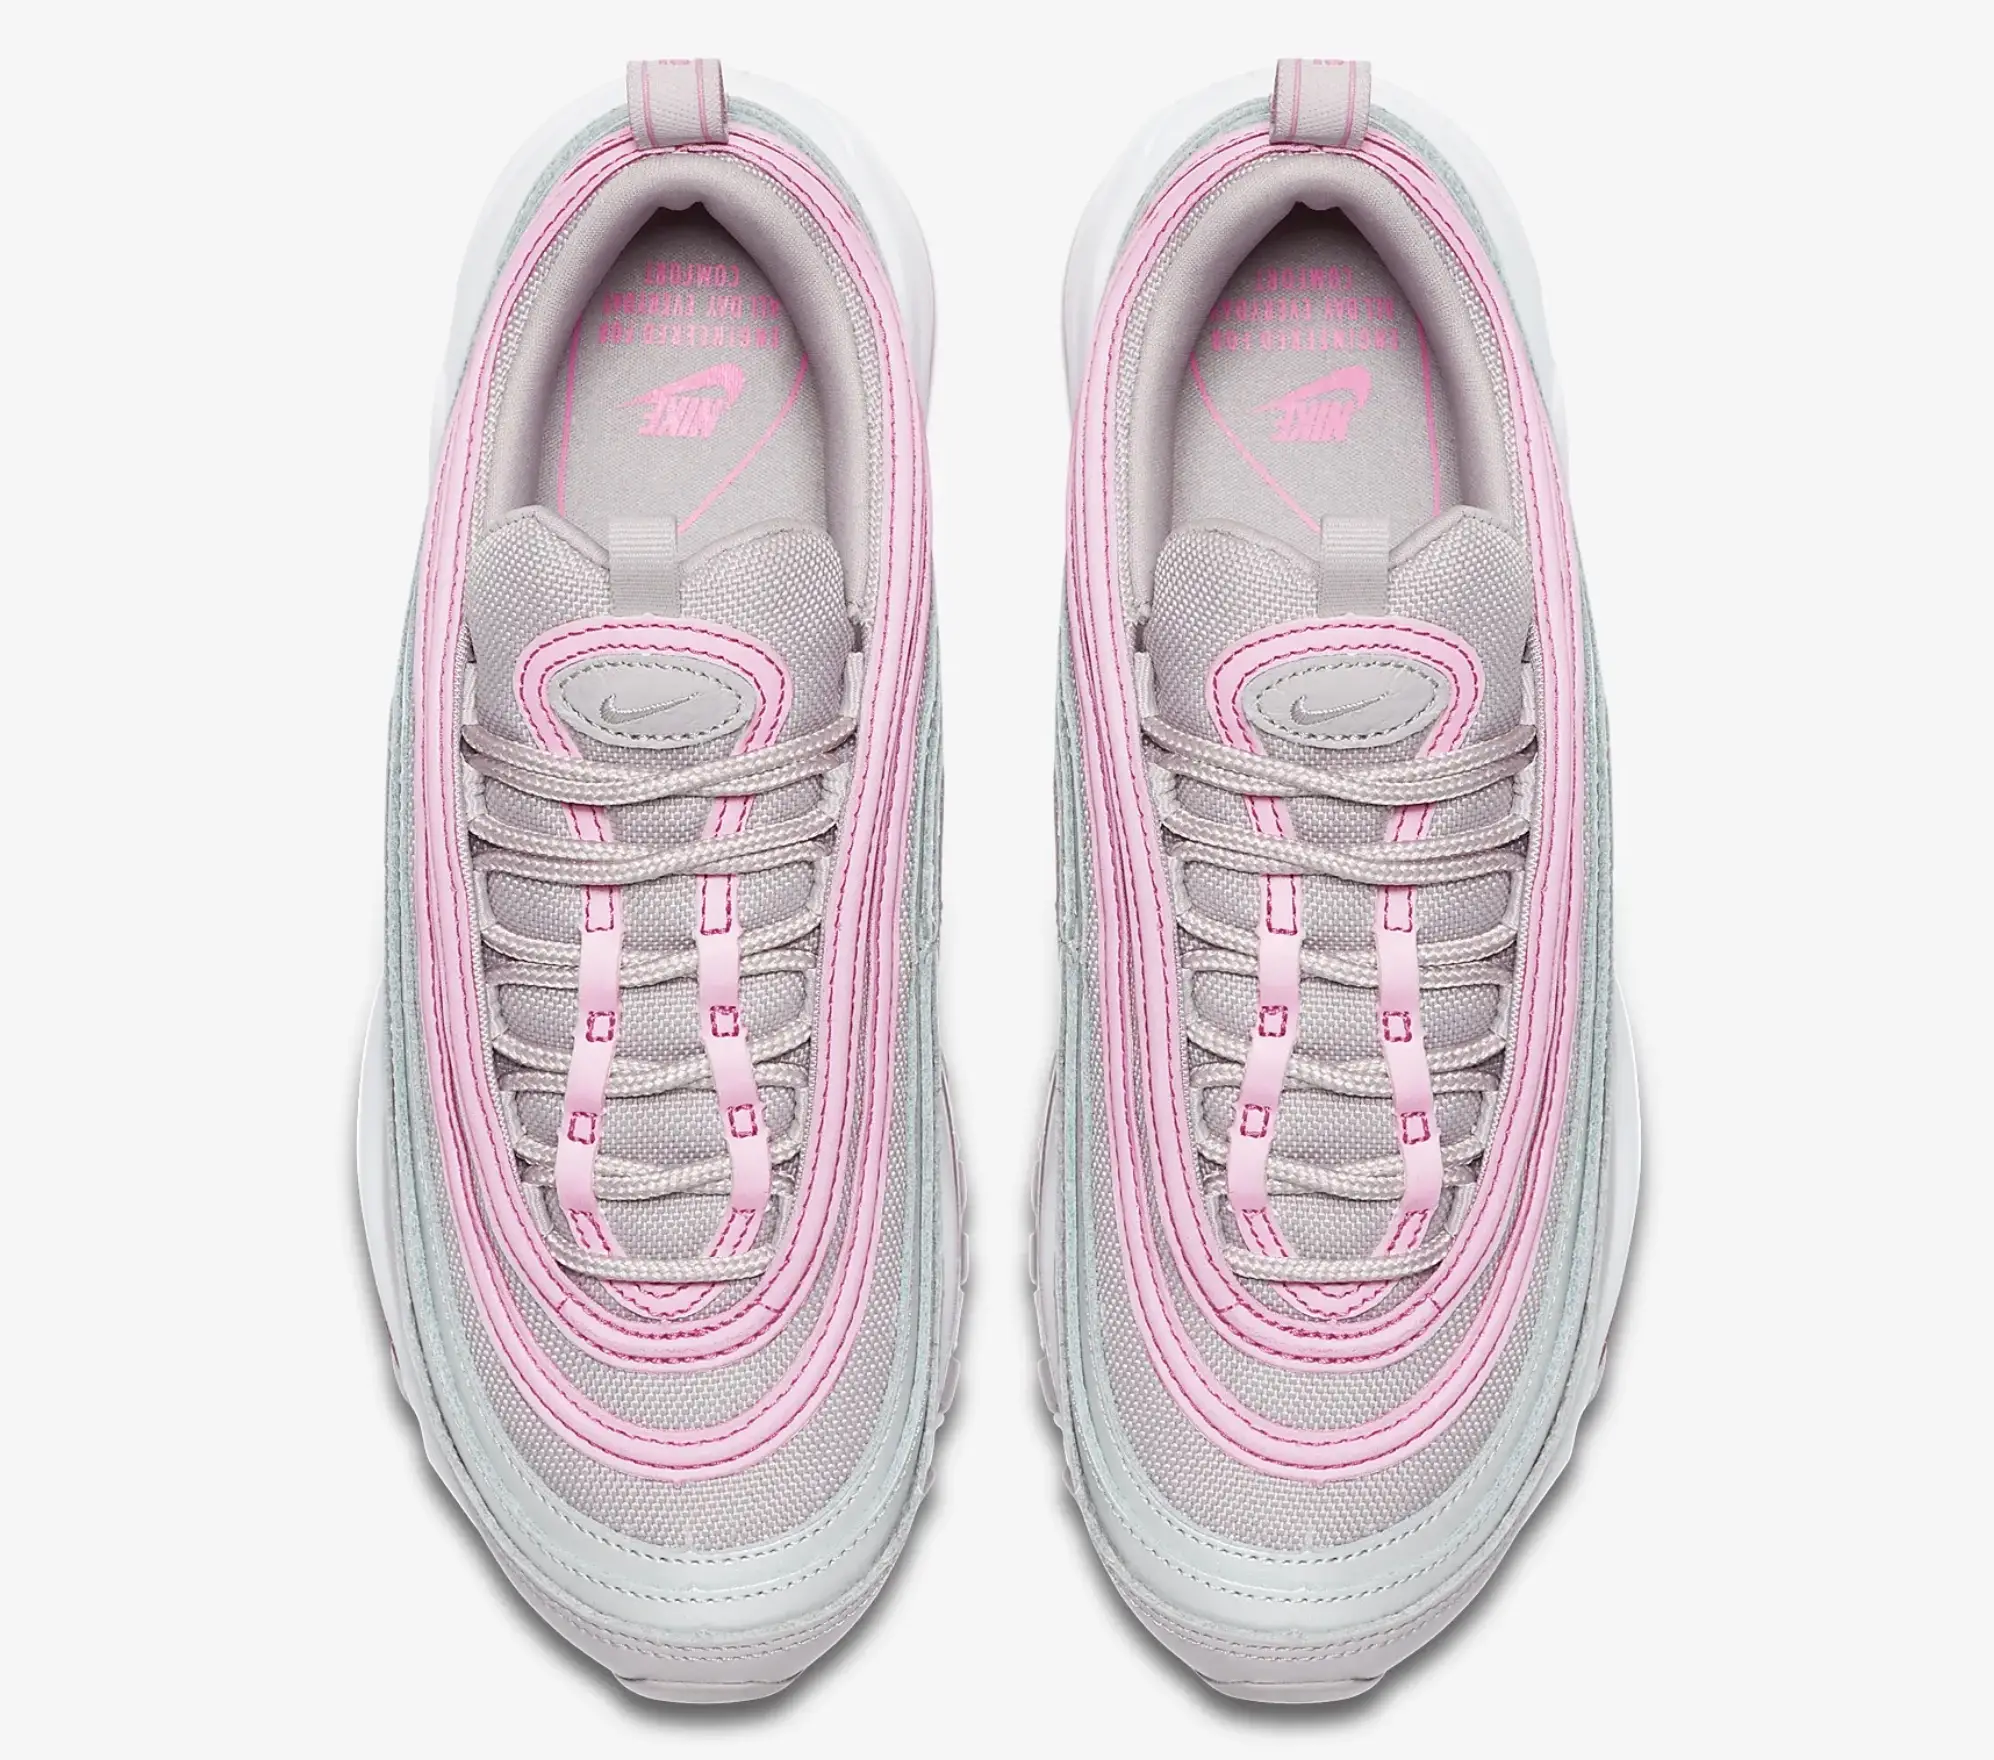 You Don't Want To Miss The Savings On THIS Pink Nike Air Max 97! | The ...